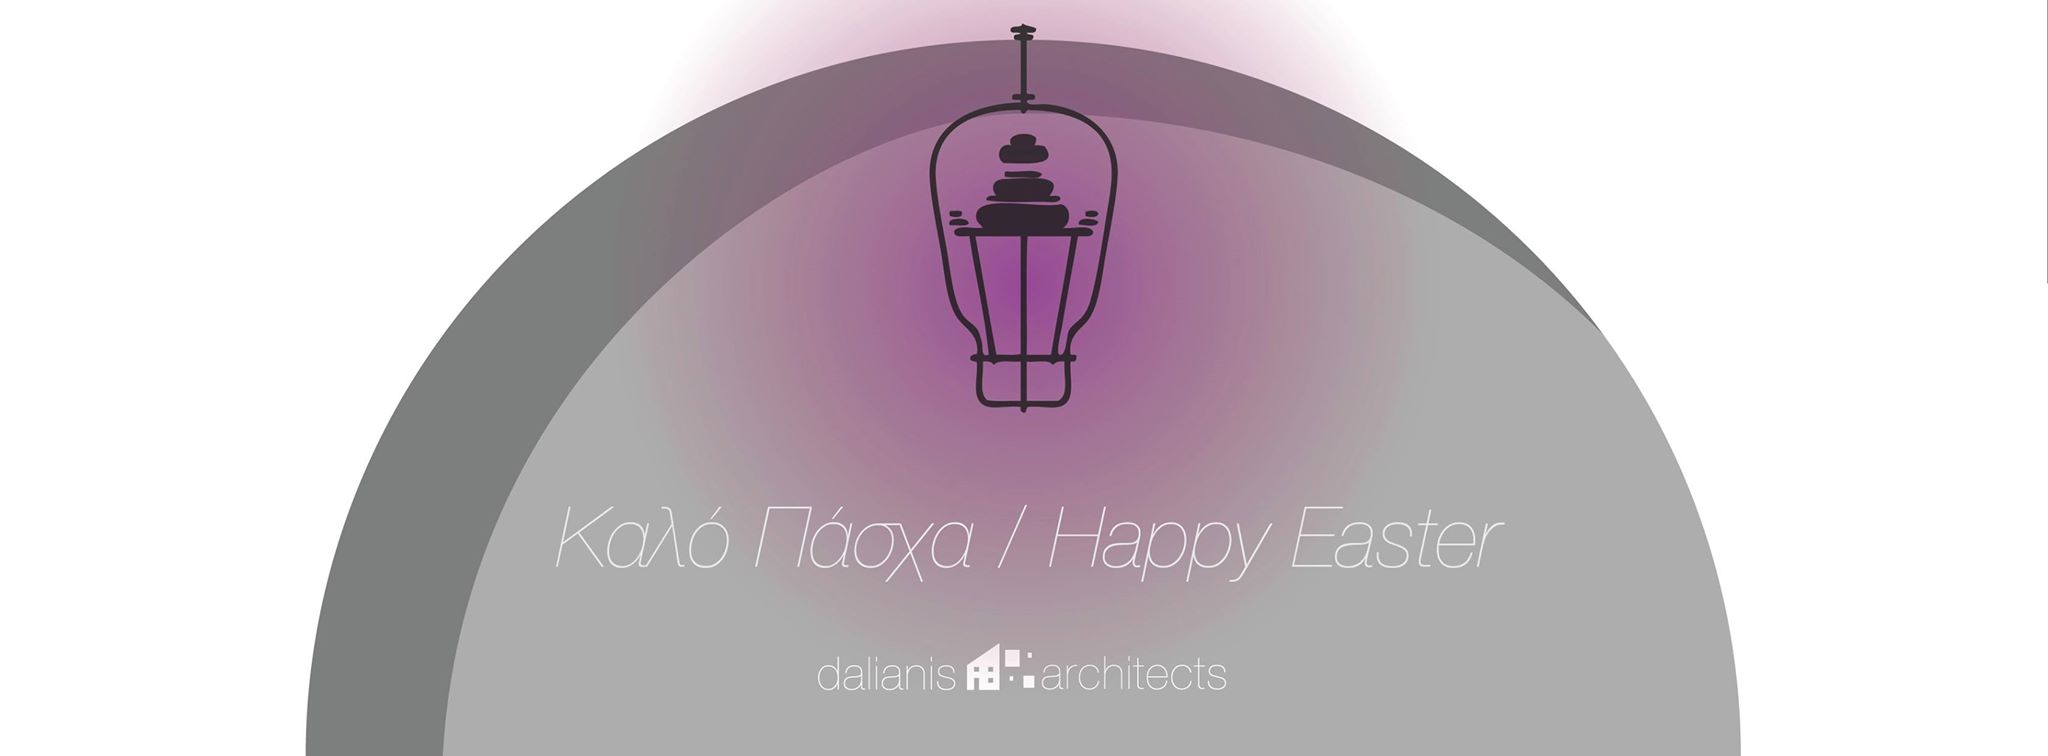 Happy Easter From Dalianis Architects